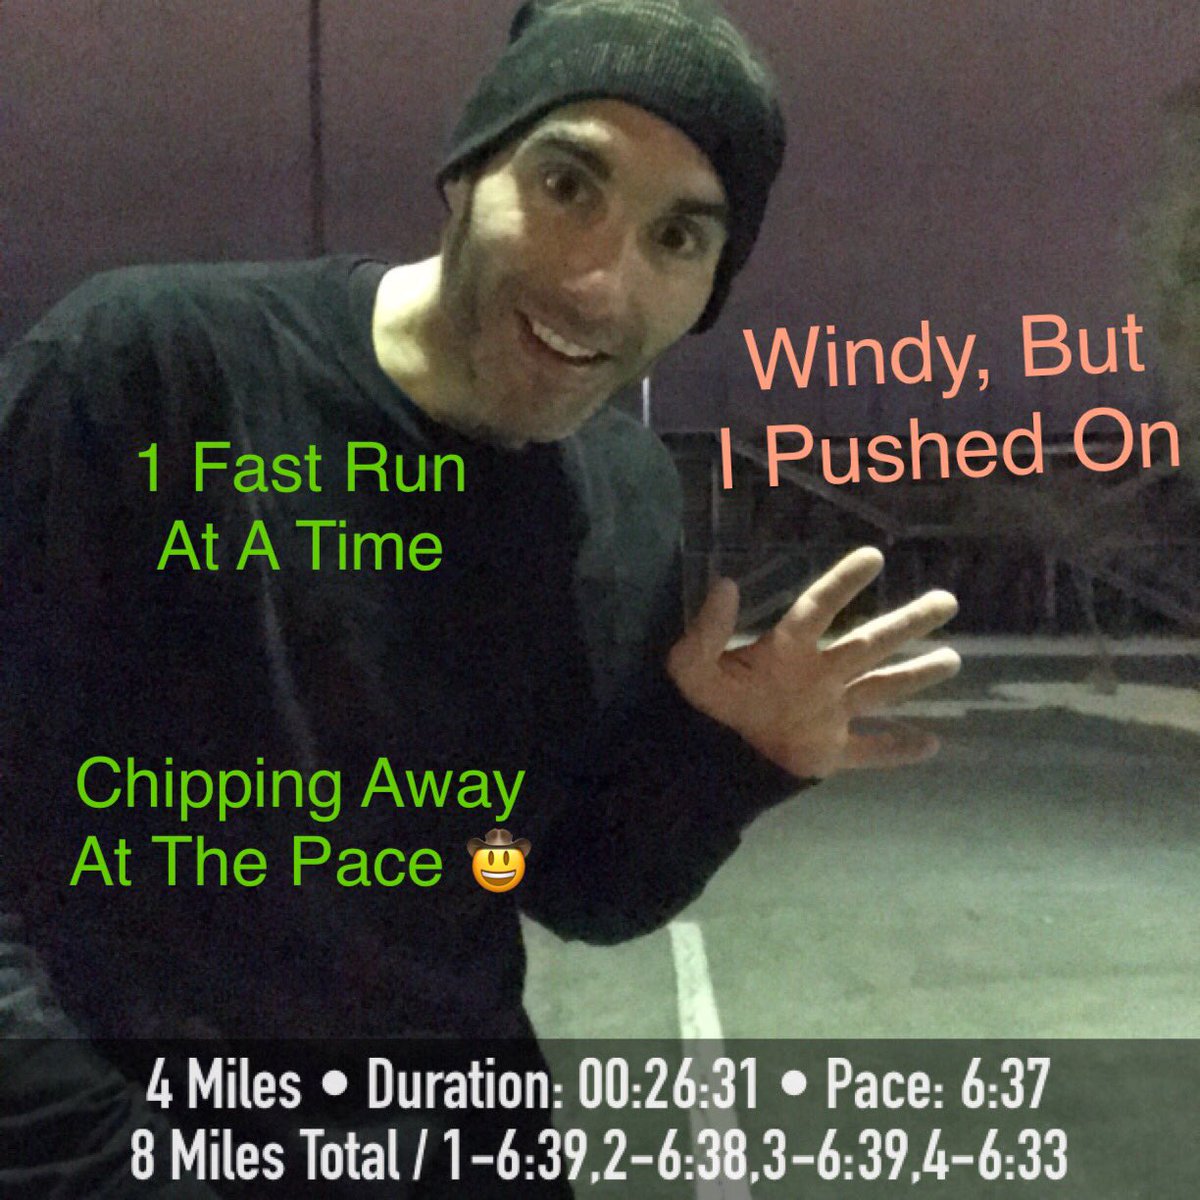 Weird. When I left my house there was little when. When I arrived to the track miles away, I found lots of wind on the back half of the track. Odd. Kept at it and pushed through. #wearetherunners #runselfierepeat #runnh #runforlife #runshots #runningmakesmehappy #runnershigh